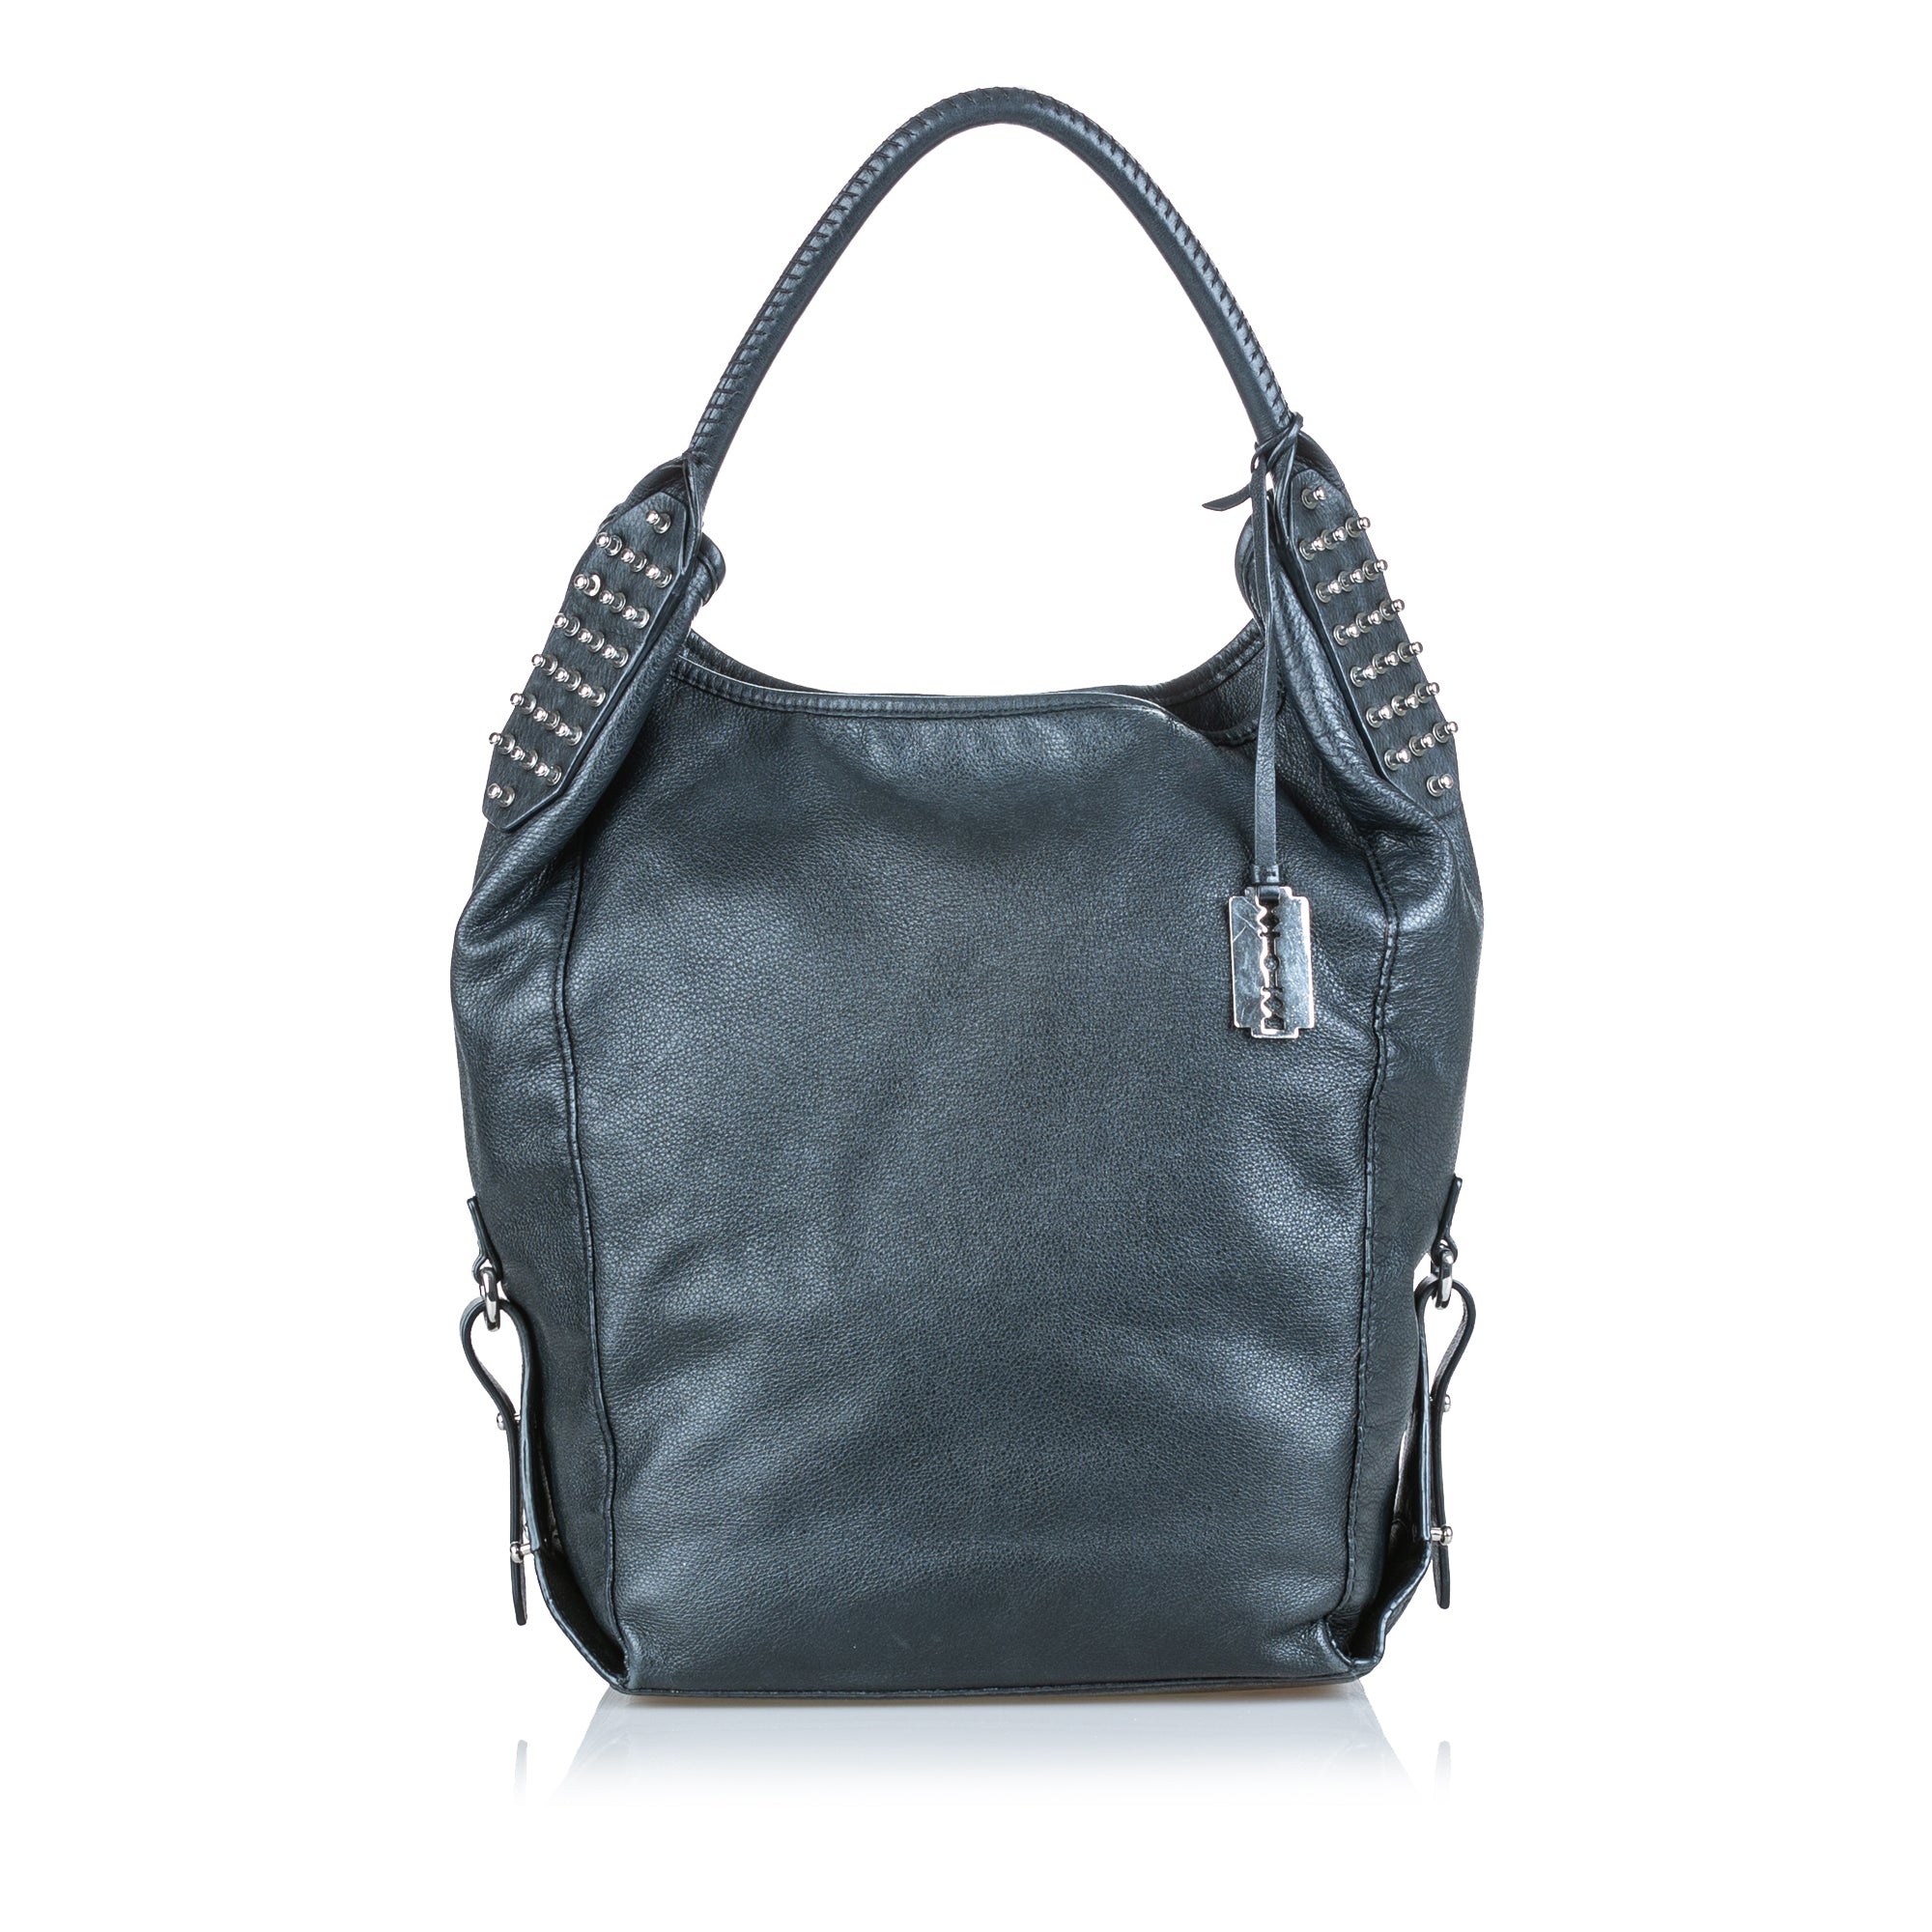 Buy & Consign Authentic Alexander Mcqueen Studded Leather Hobo Bag Grey at The Plush Posh